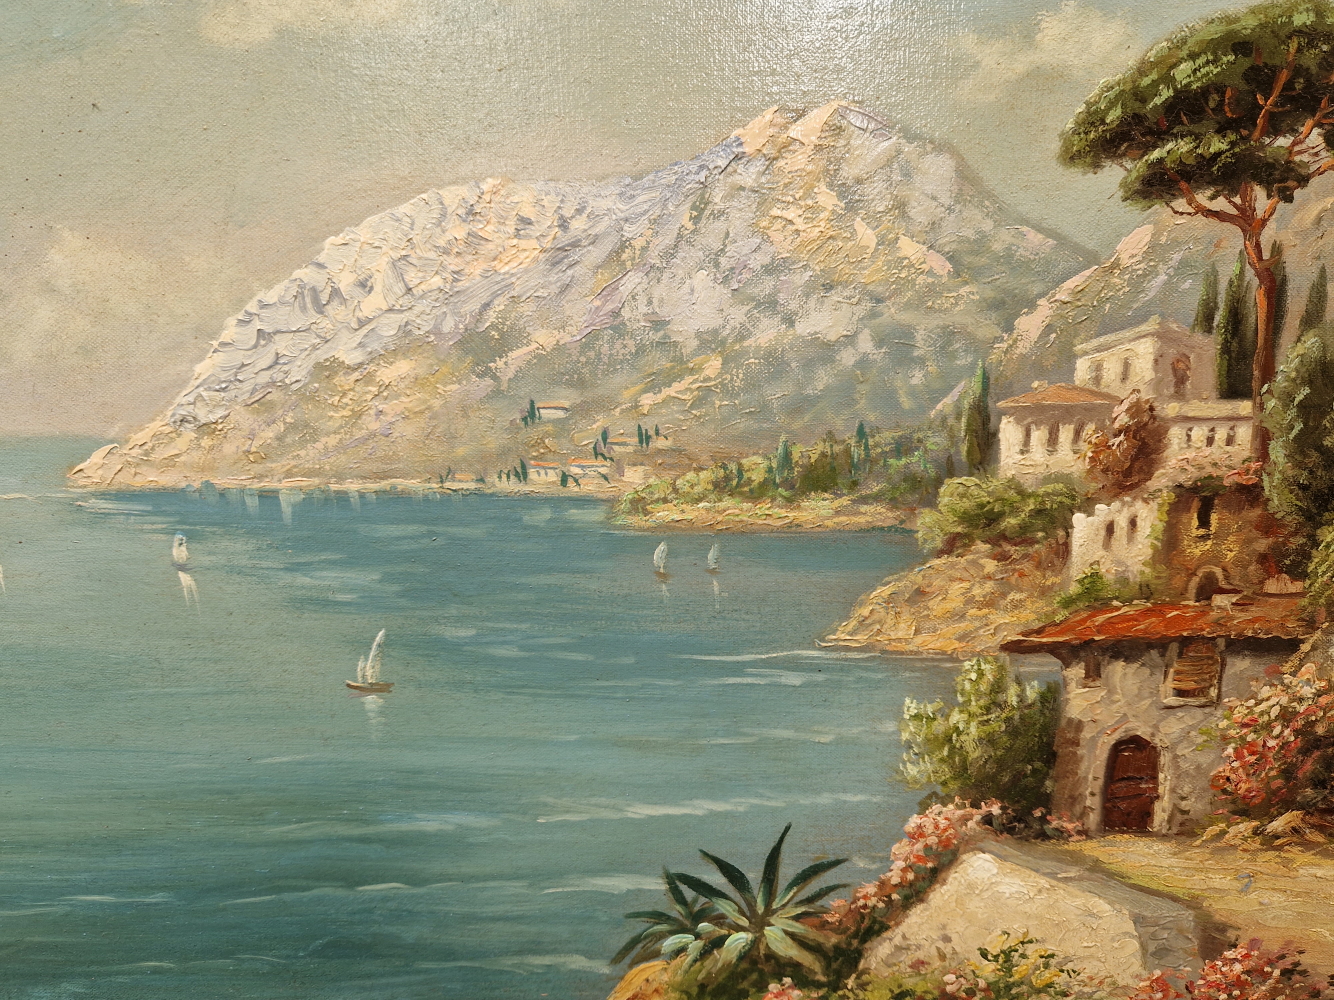 20th CENTURY CONTINENTAL SCHOOL A COASTAL VIEW, SIGNED INDISTINCTLY, OIL ON CANVAS. 50 x 100cms - Image 10 of 10